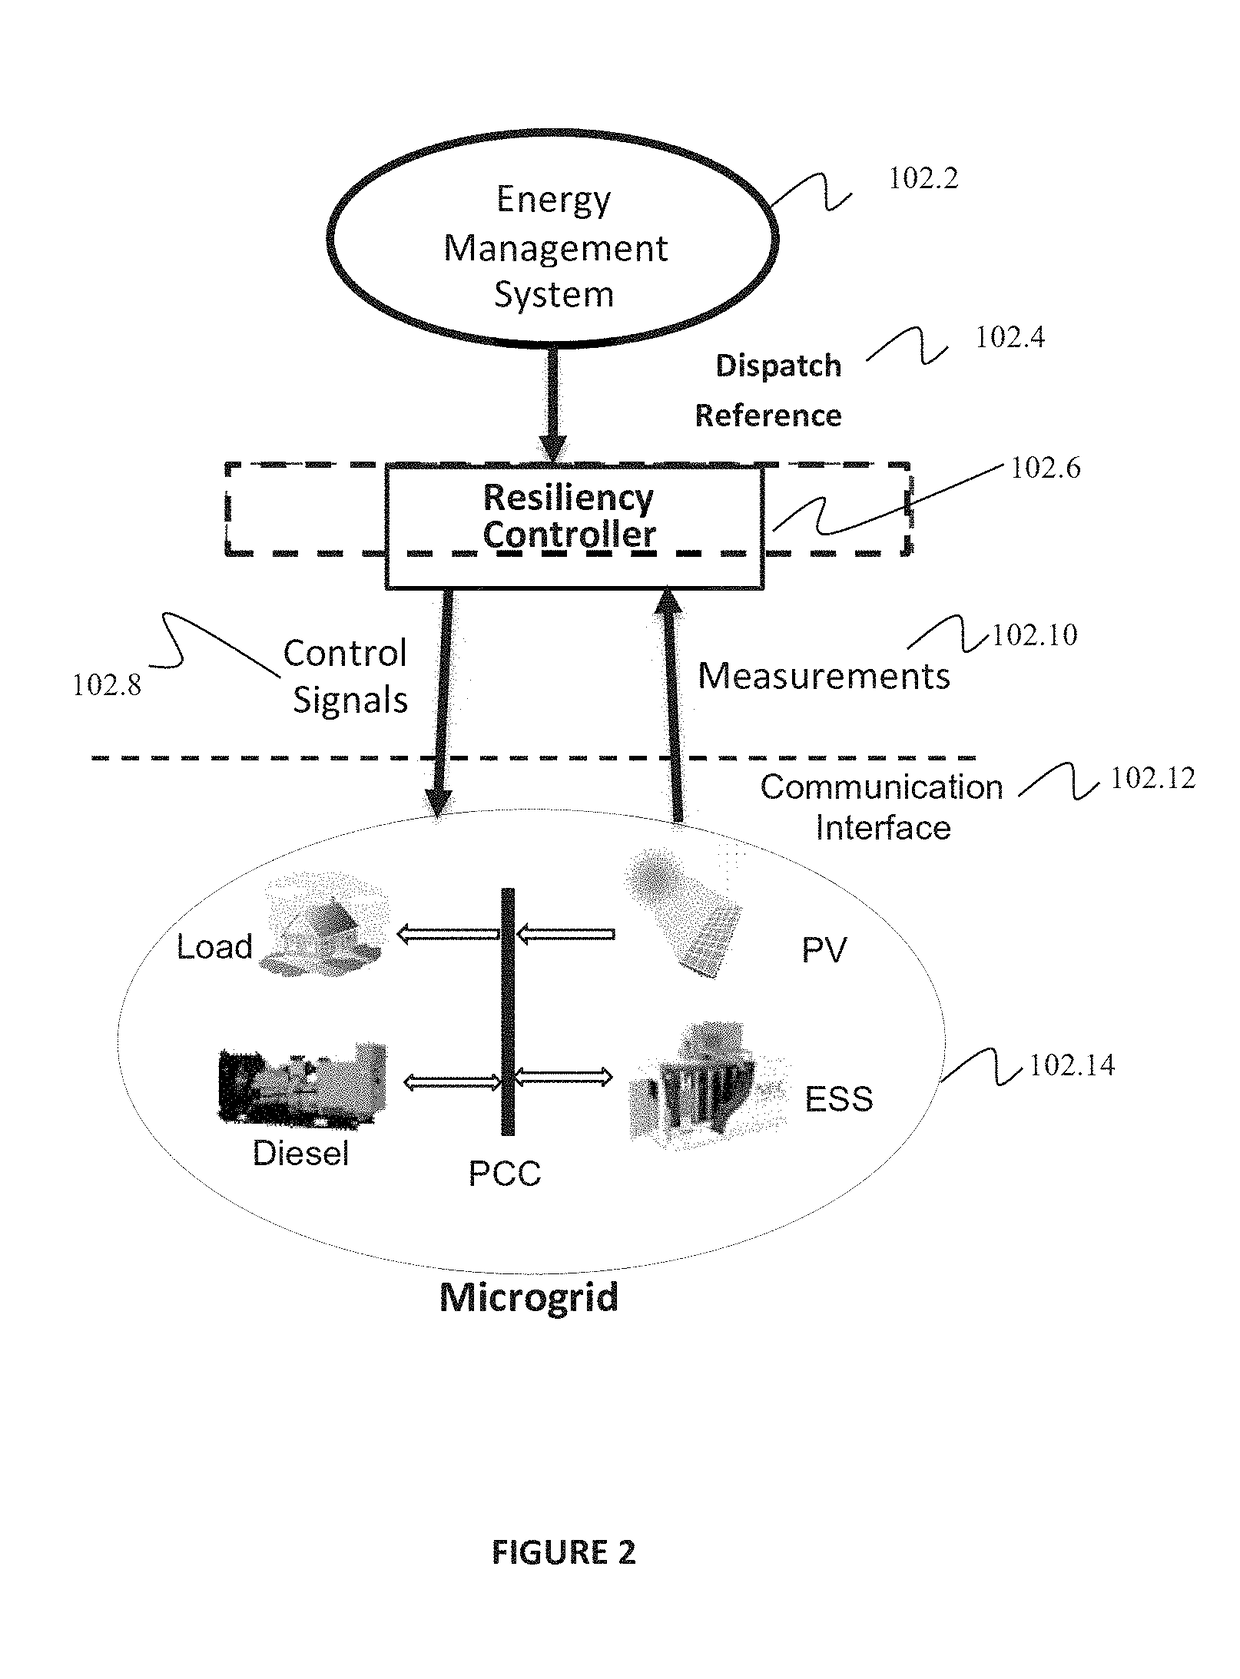 Resiliency Controller for Voltage Regulation in Microgrids